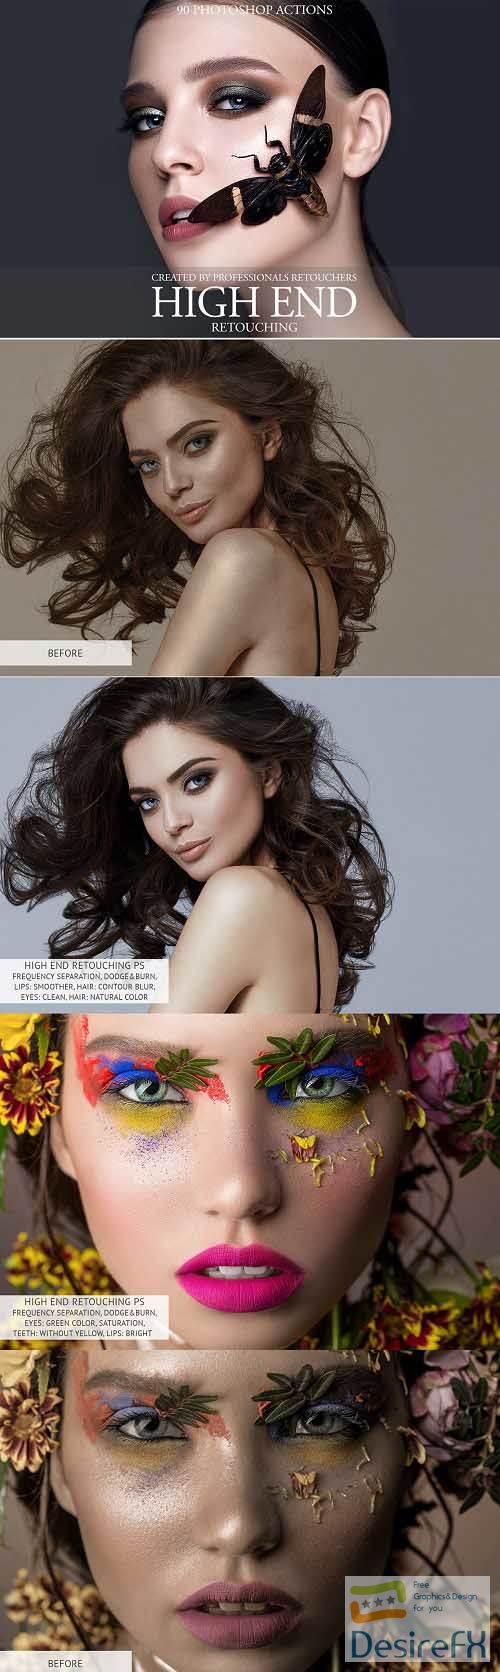 High End Retouching Photoshop Action - 3576680